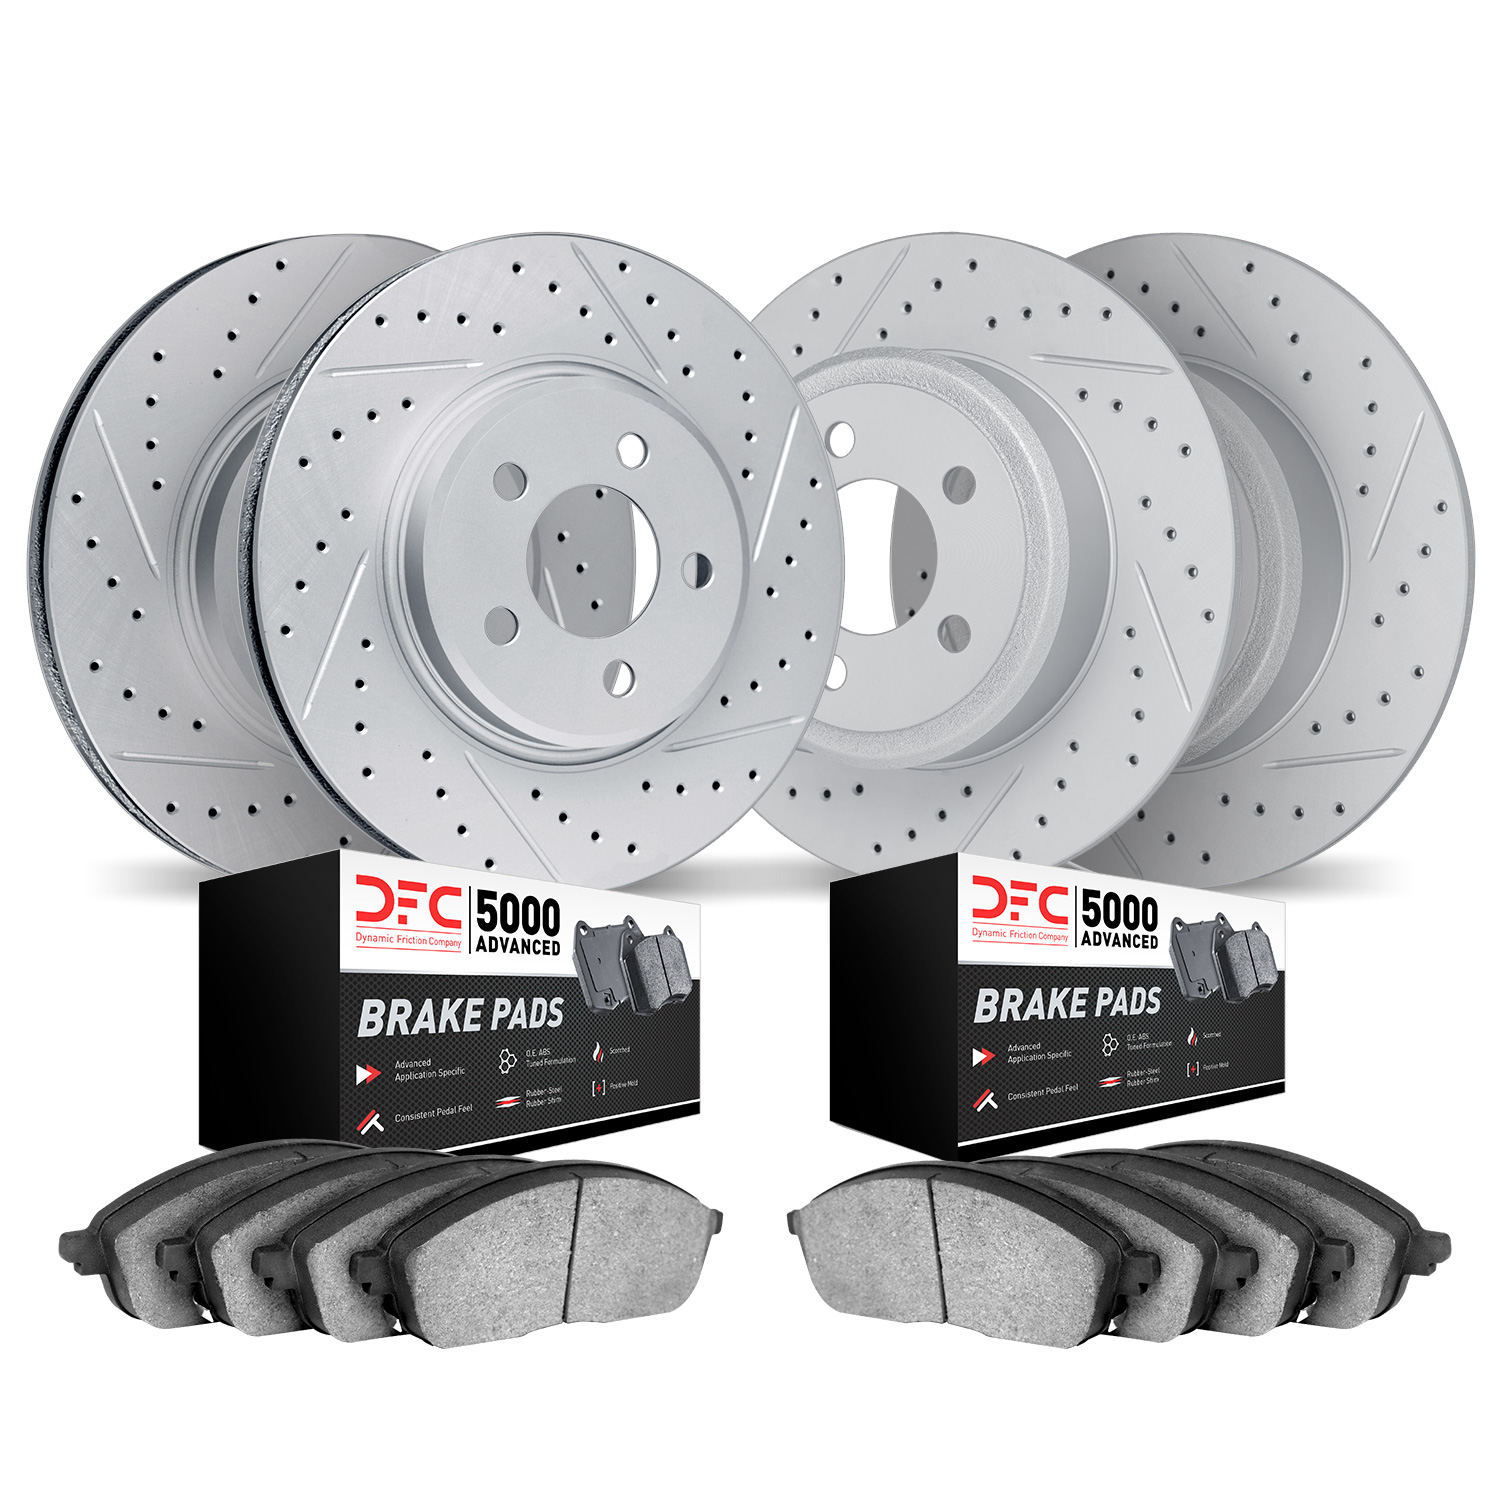 2504-76084 Geoperformance Drilled/Slotted Rotors w/5000 Advanced Brake Pads Kit, 2000-2001 Lexus/Toyota/Scion, Position: Front a